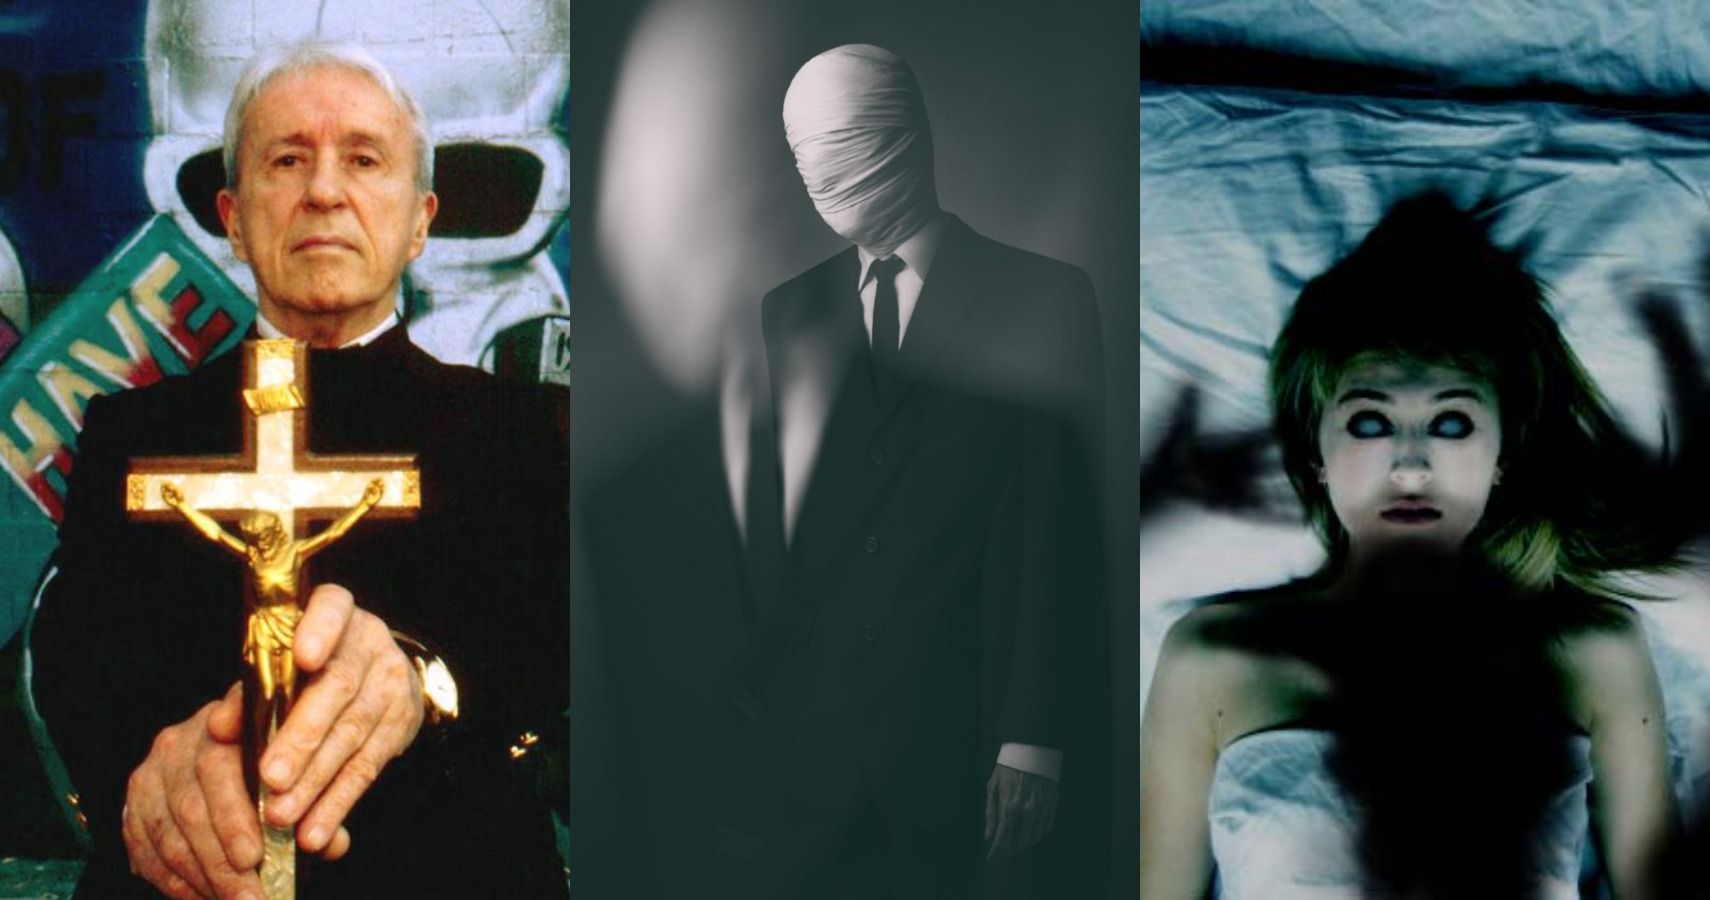 Split image of Father Malchin, the Slenderman, and someone scared by a shadow while sleeping